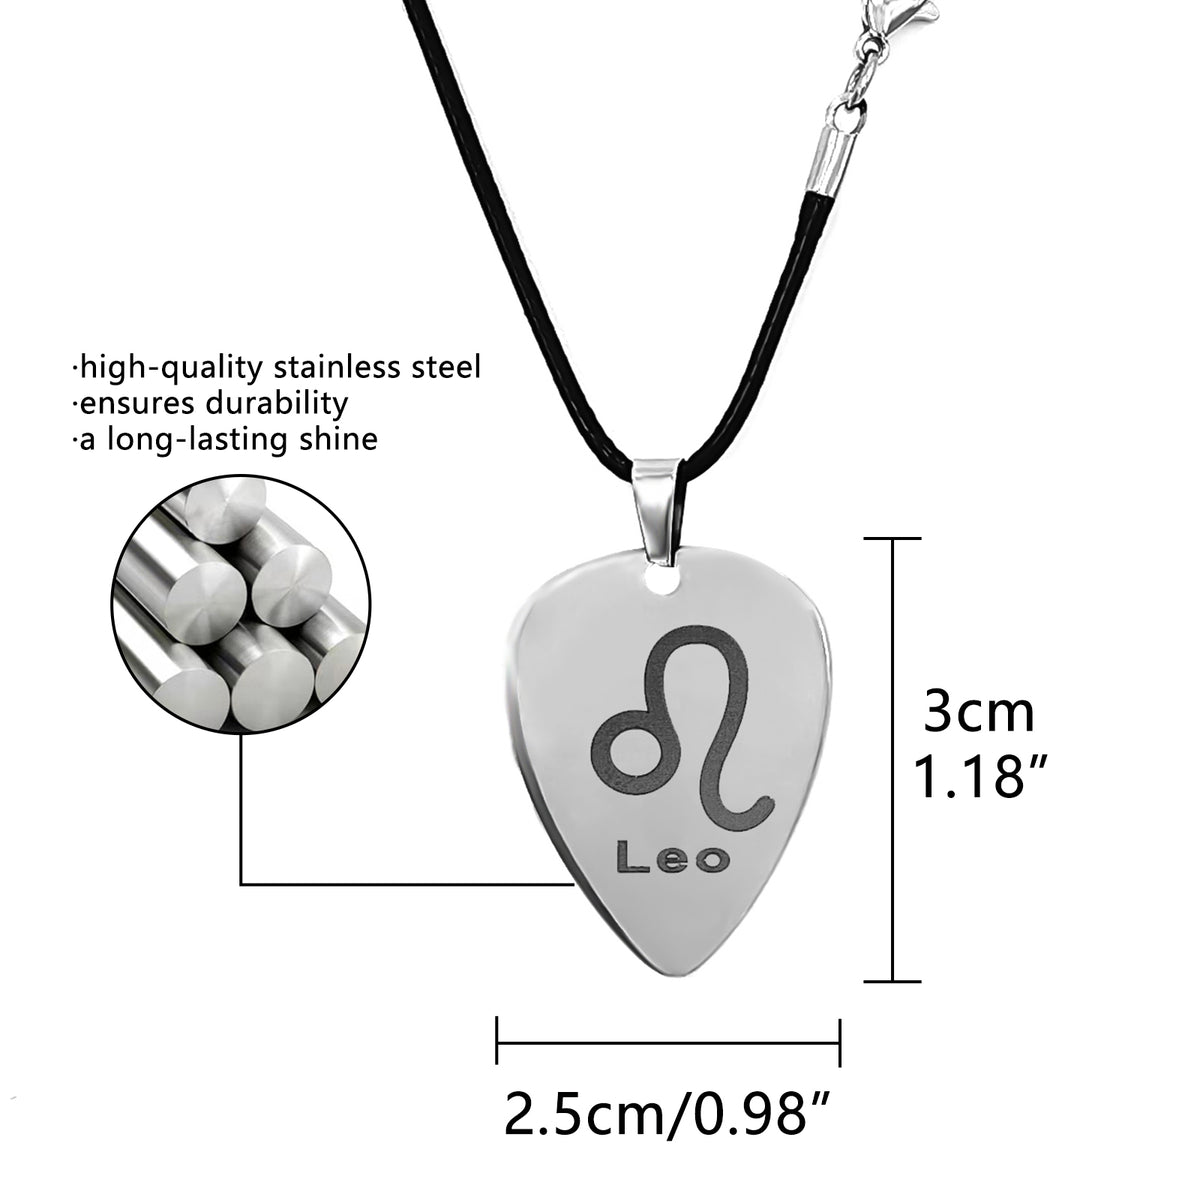 Musiin Guitar Pick Necklace Stainless Steel 12 Constellation Picks Pendant Necklace Music Jewelry for Men Women Gift (Leo)